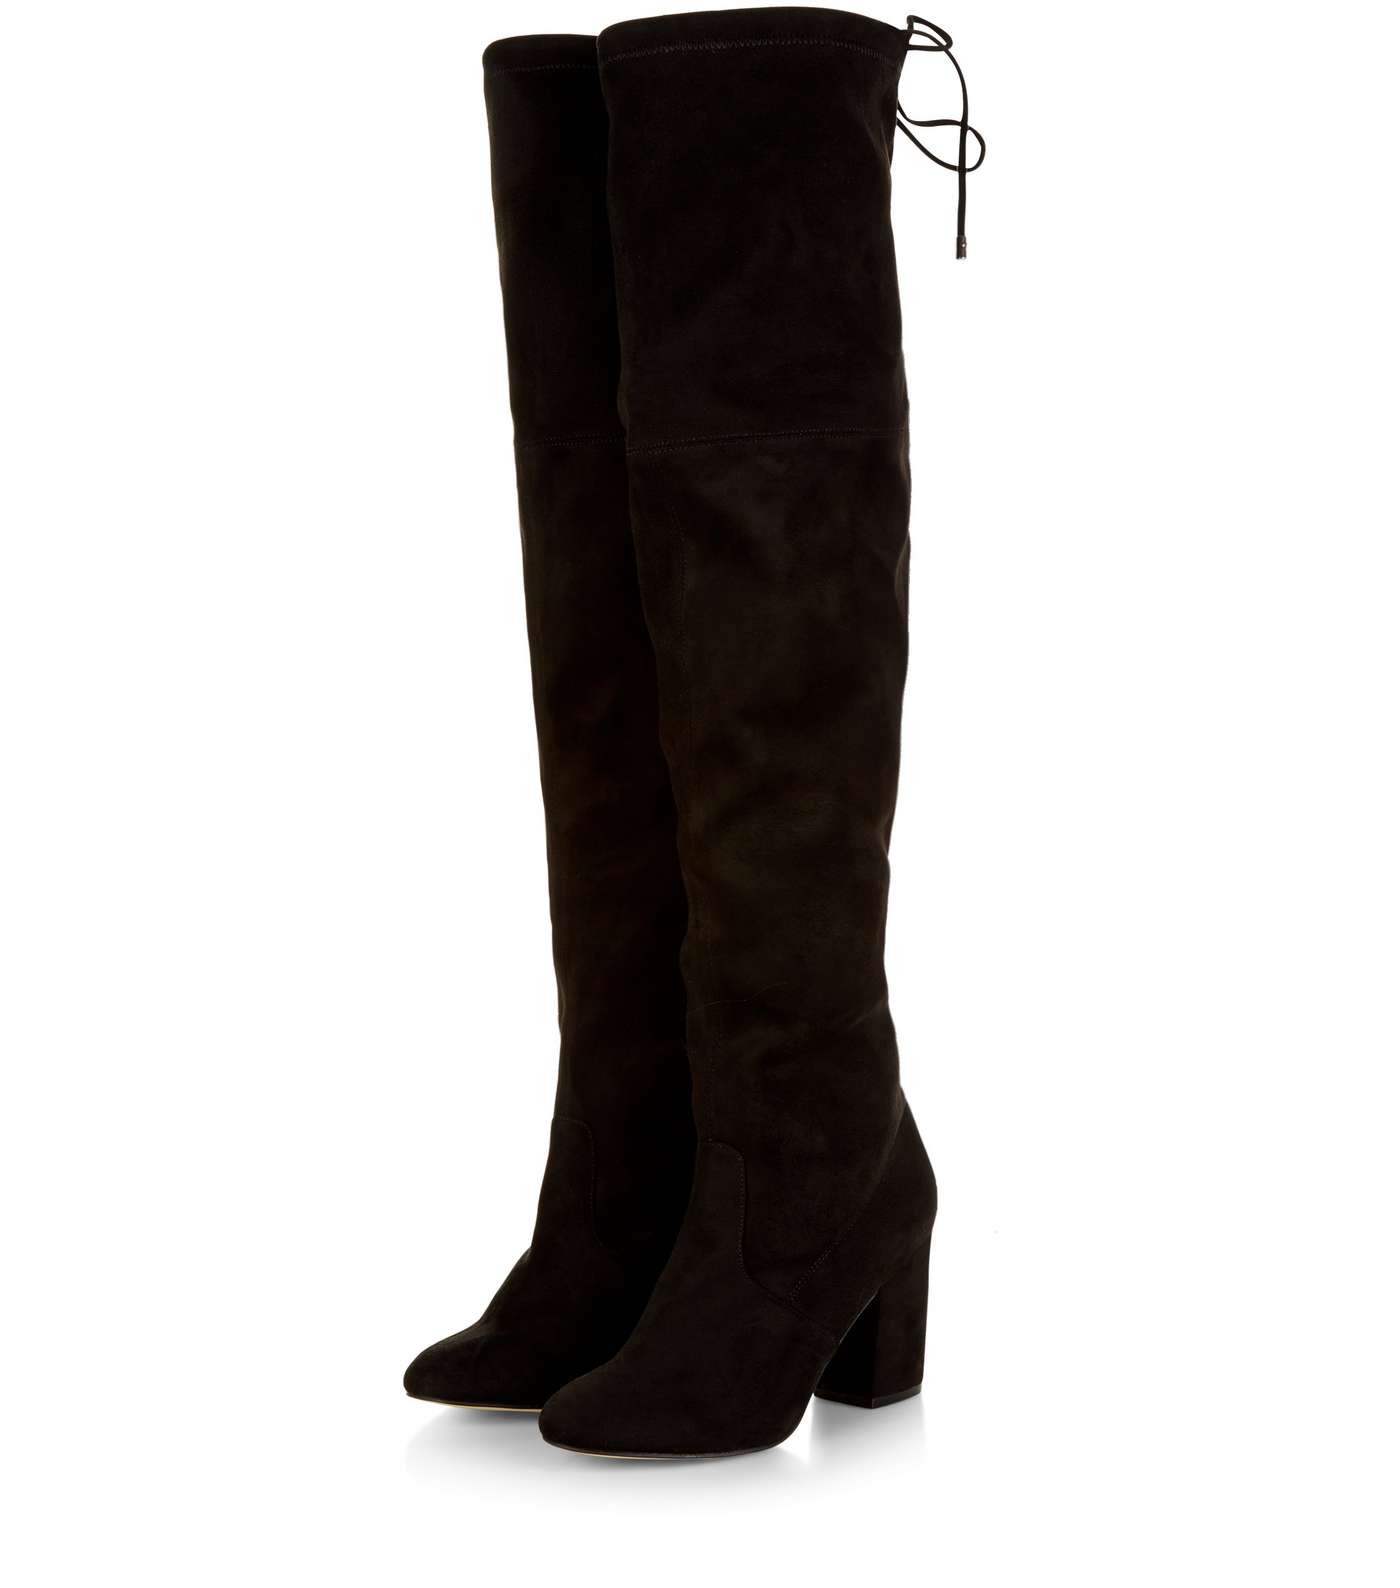 Black Suedette Tie Back Over The Knee Boots  Image 3